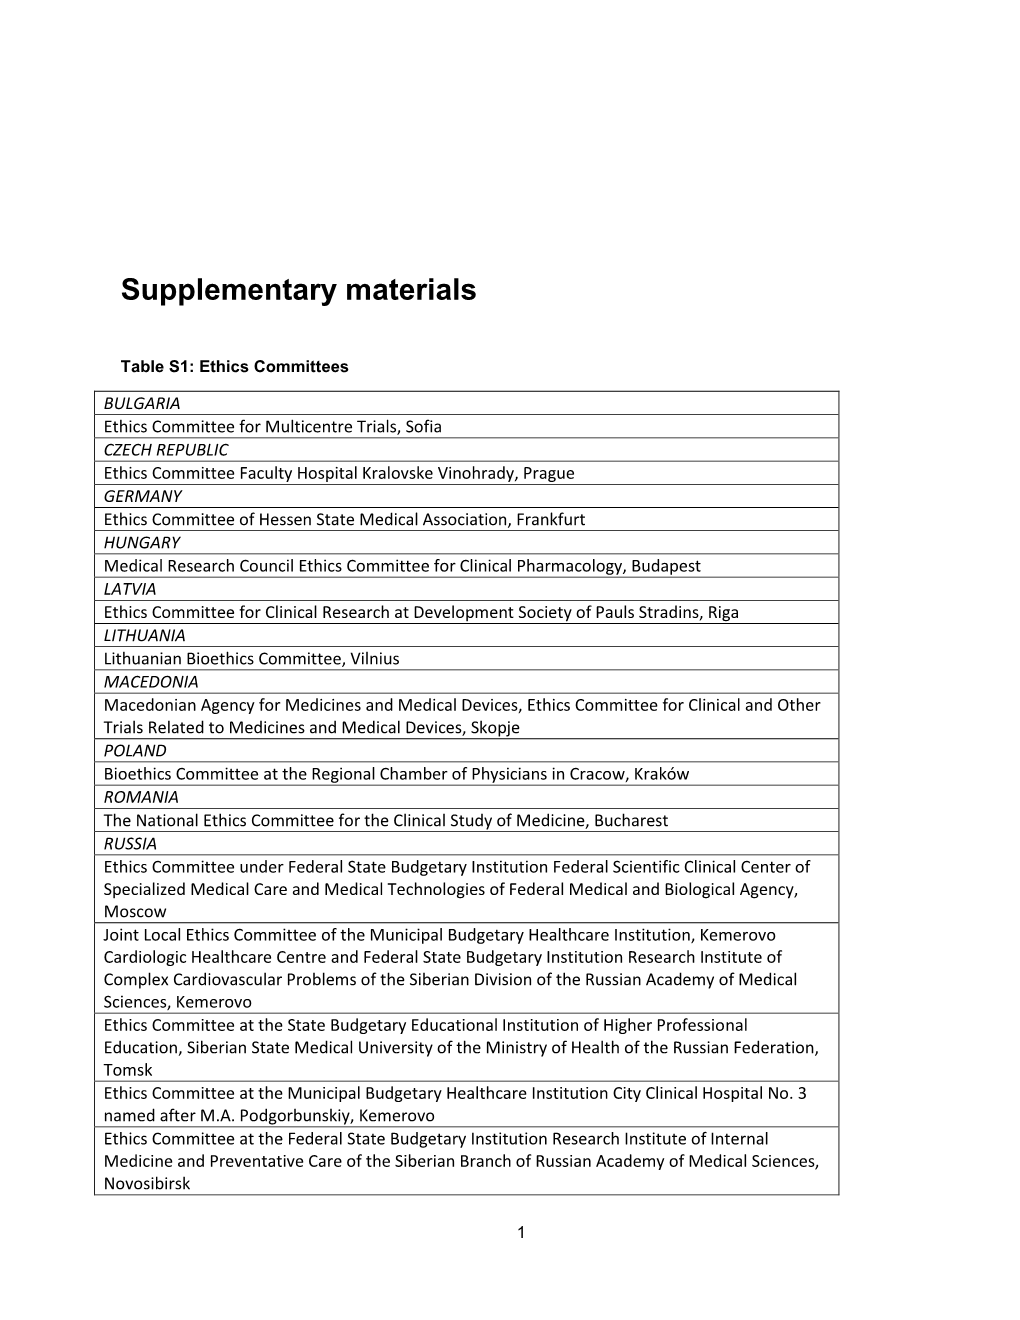 Supplementary Materials, Table S1